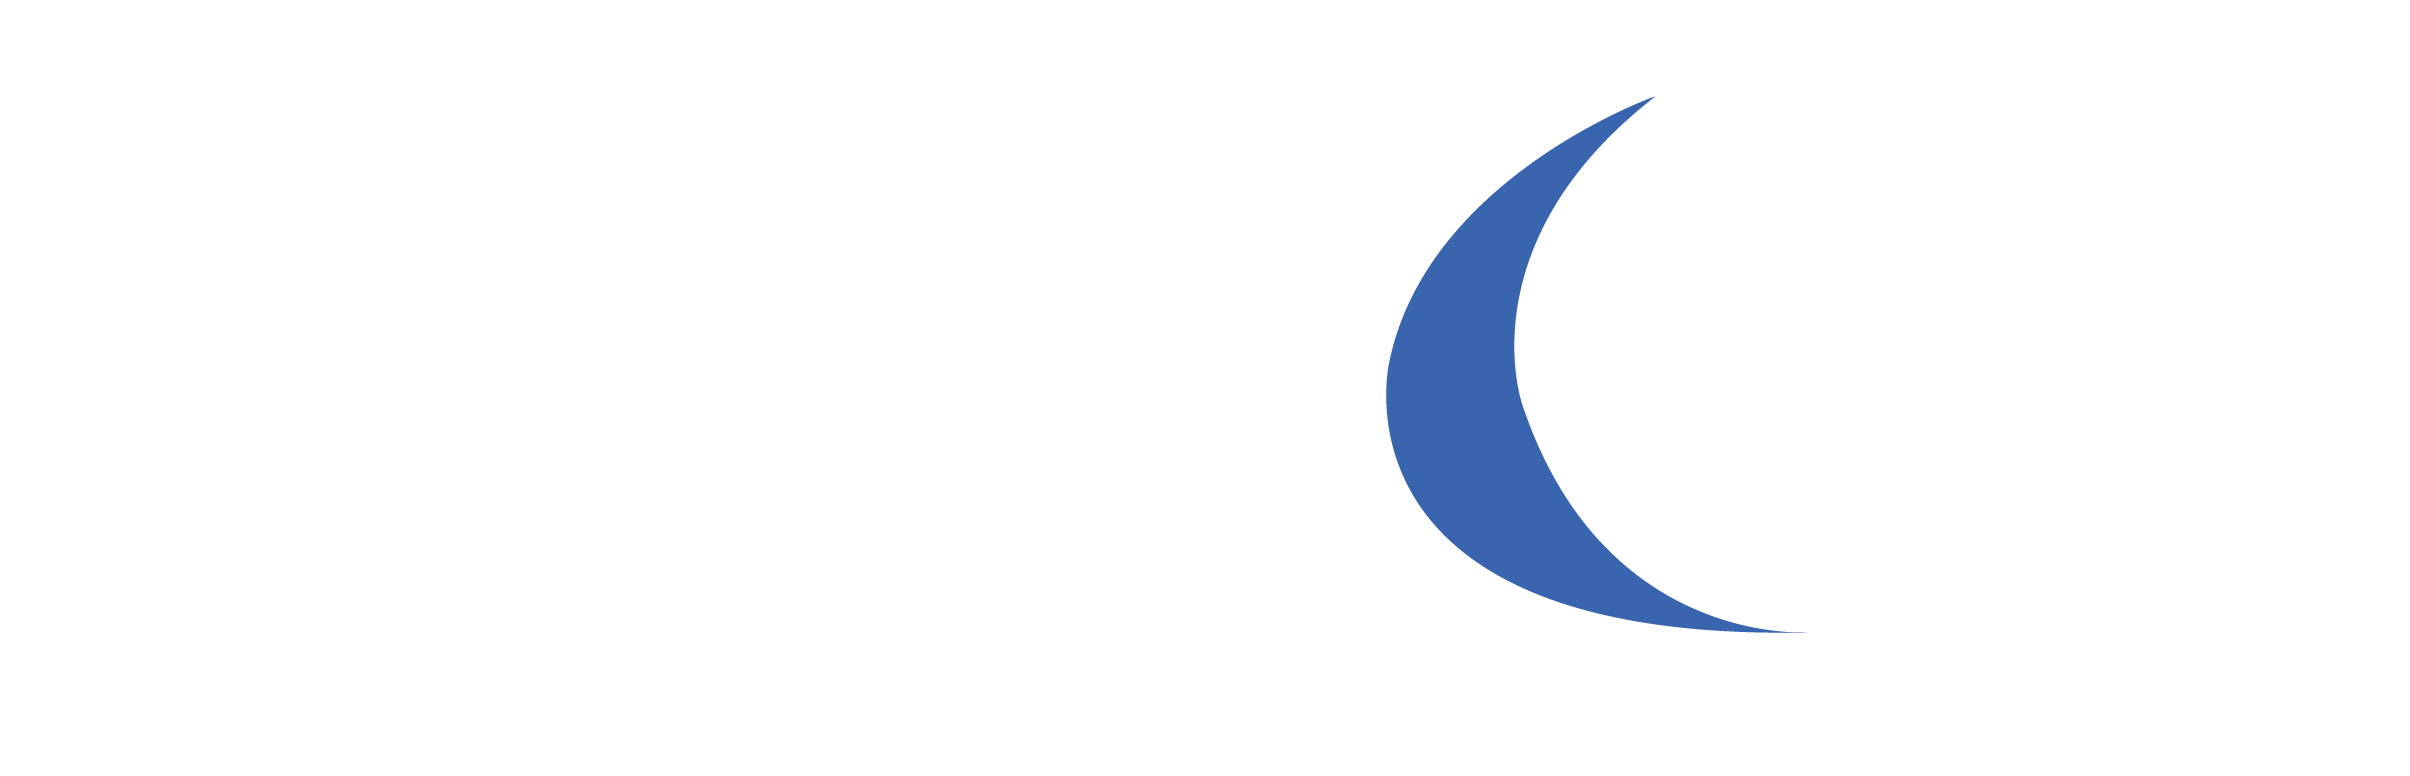 Islamic Food and Nutrition Council of America (IFANCA) Logo